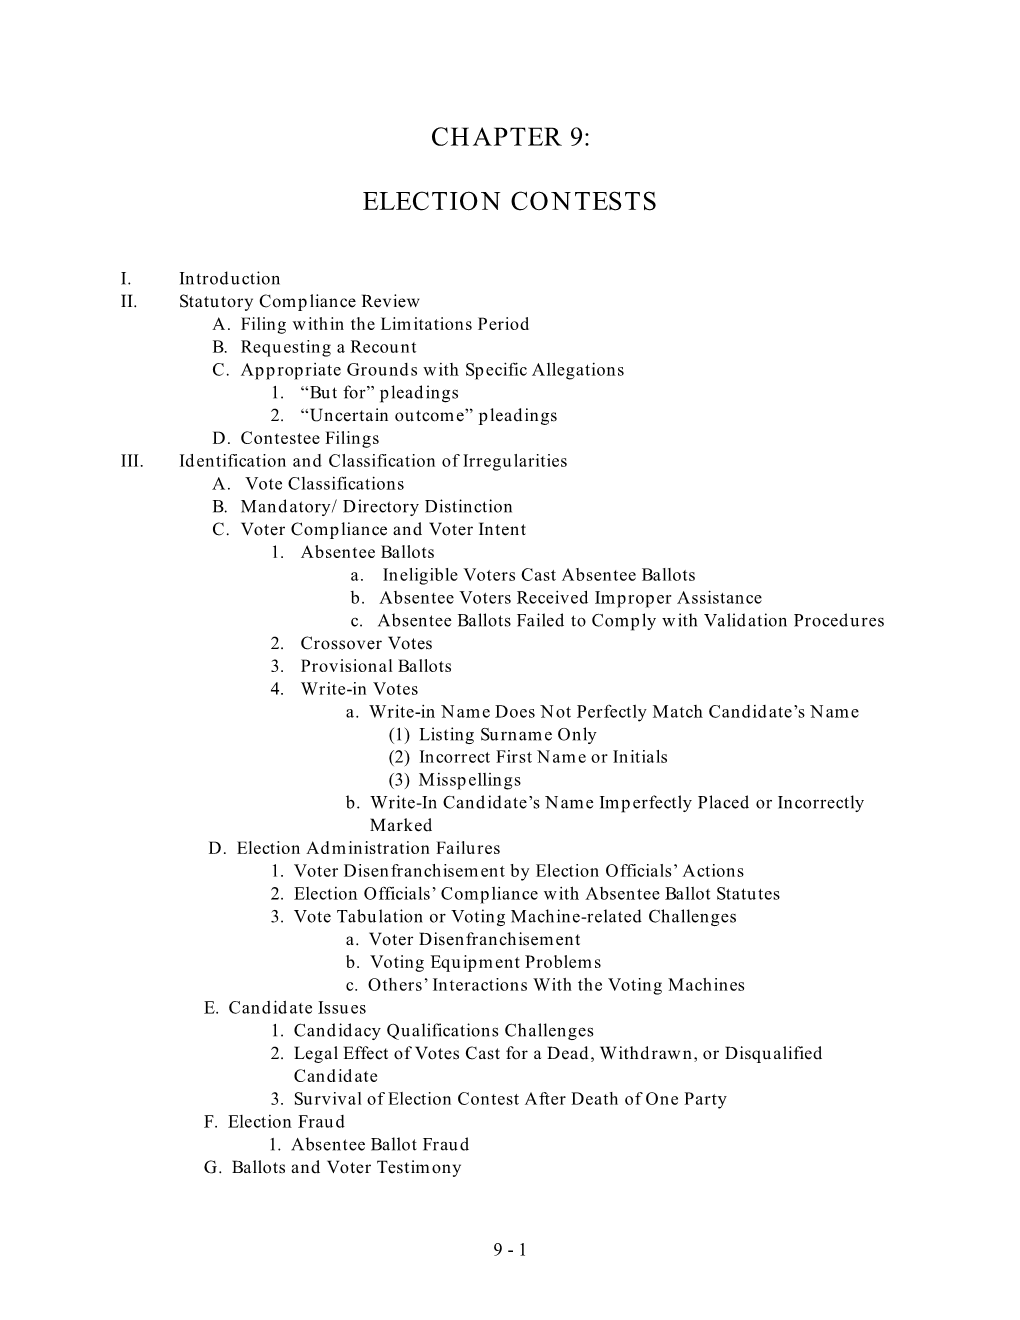 Chapter 9: Election Contests